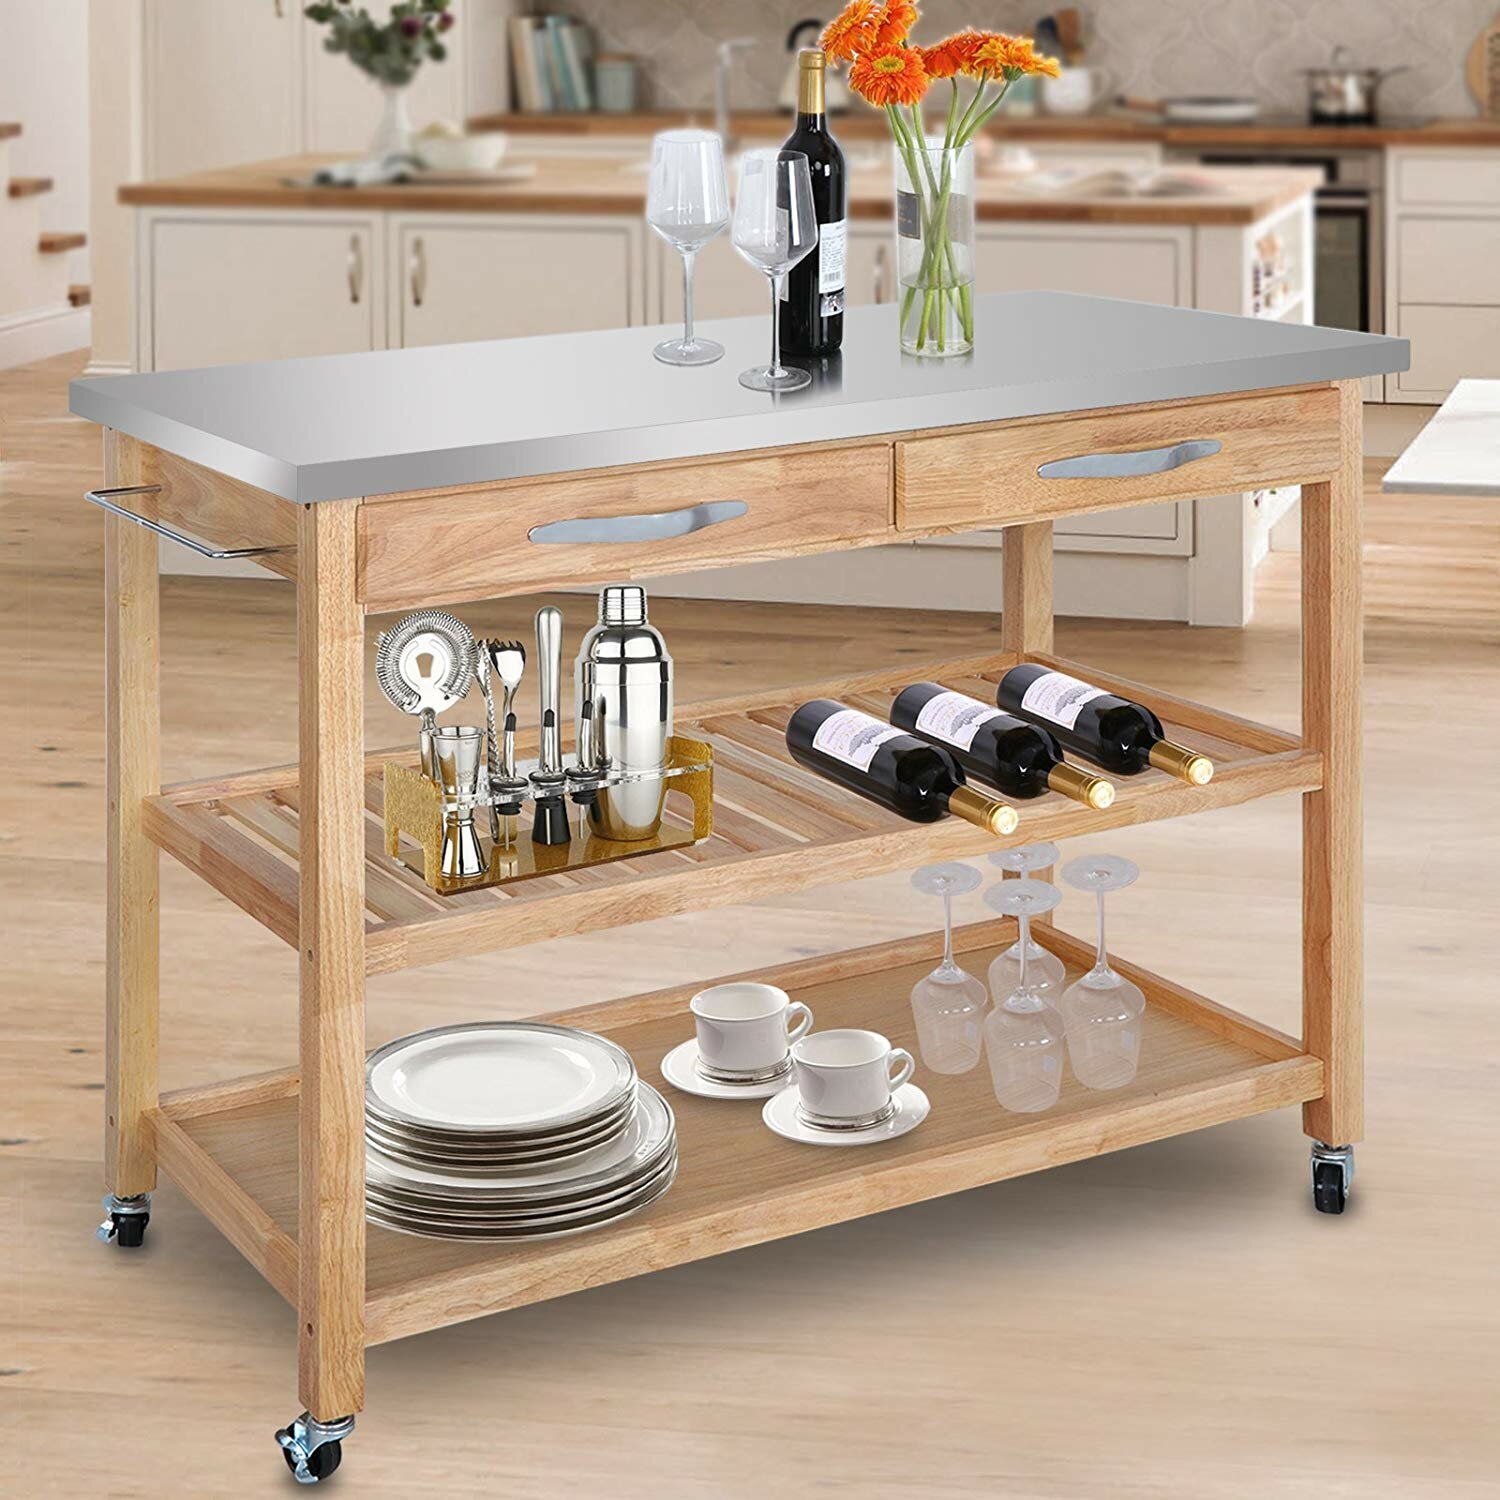 Compact stainless steel kitchen island